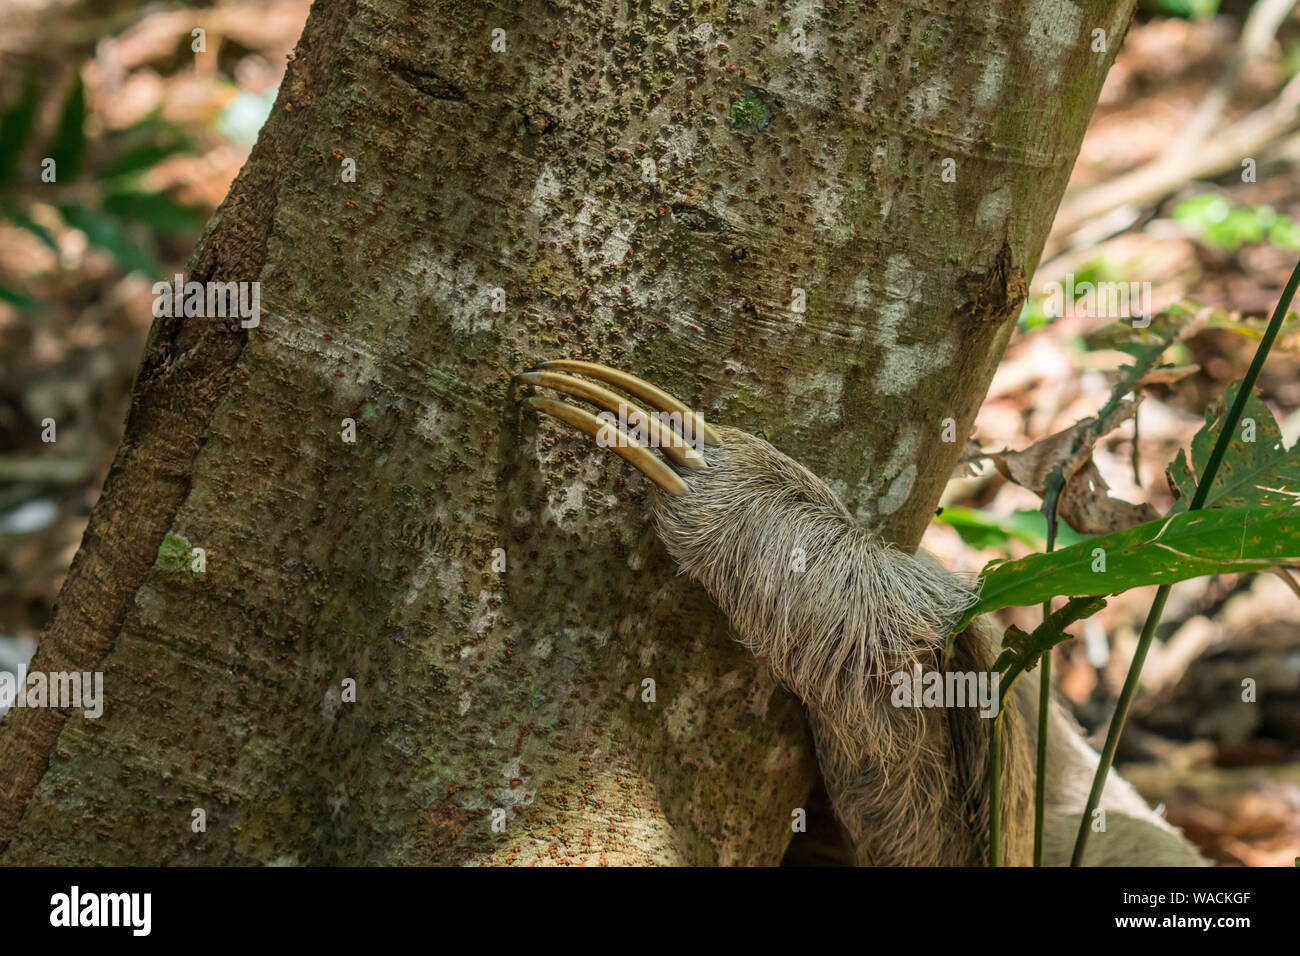 Close up of the claw of a sloth (Bradypus variegatus) on a tree in the Atlantic forest - Itamaraca island, Pernambuco state, Brazil Stock Photo